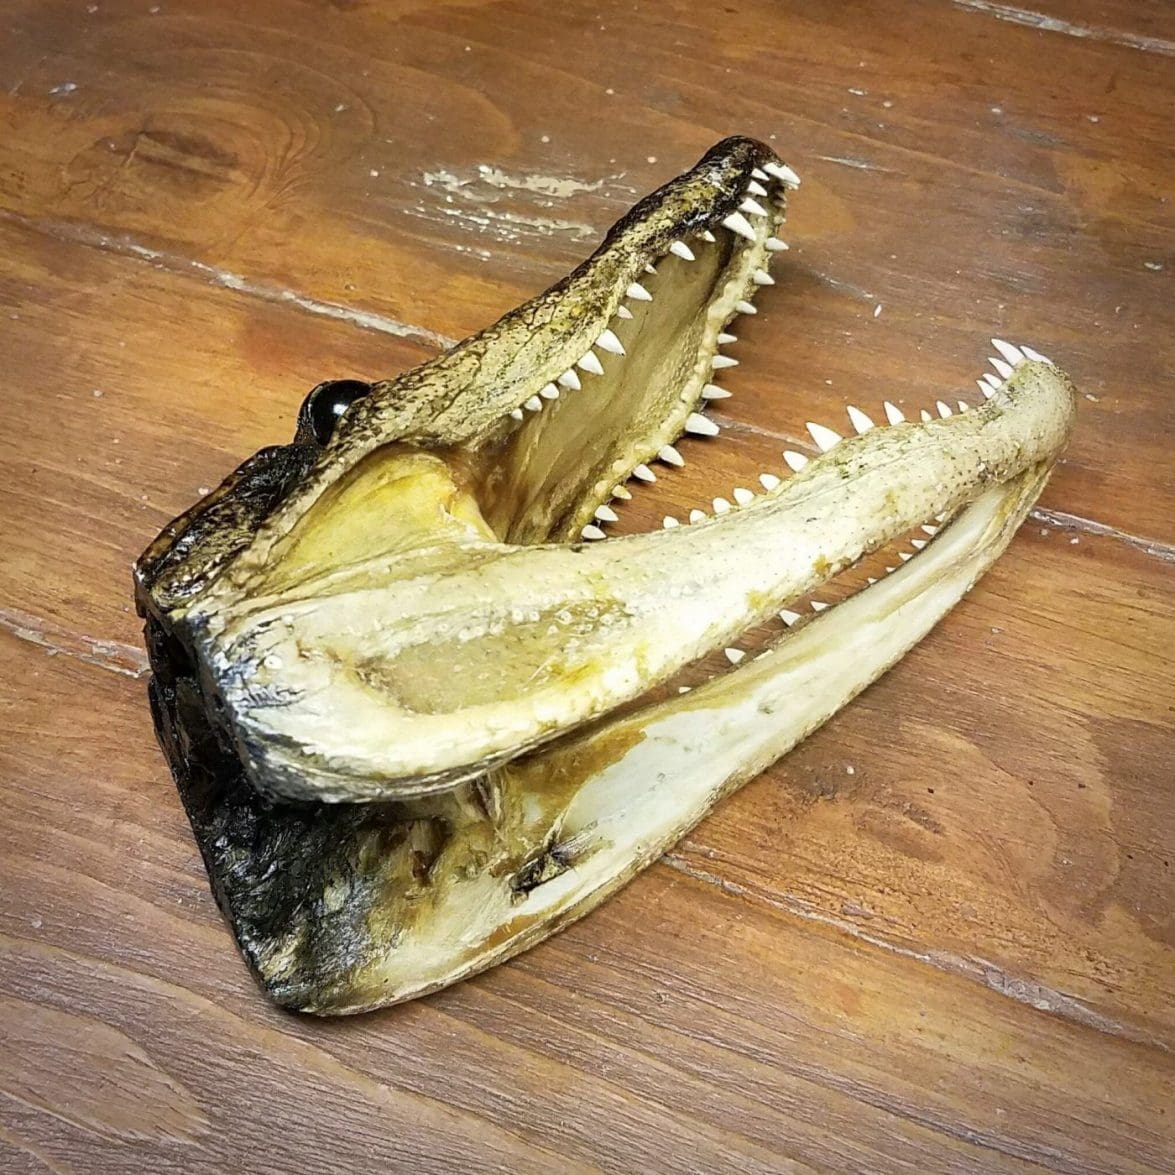 Authentic 16" Alligator Head From Real Alligator Taxidermy 57 BIG PICS 